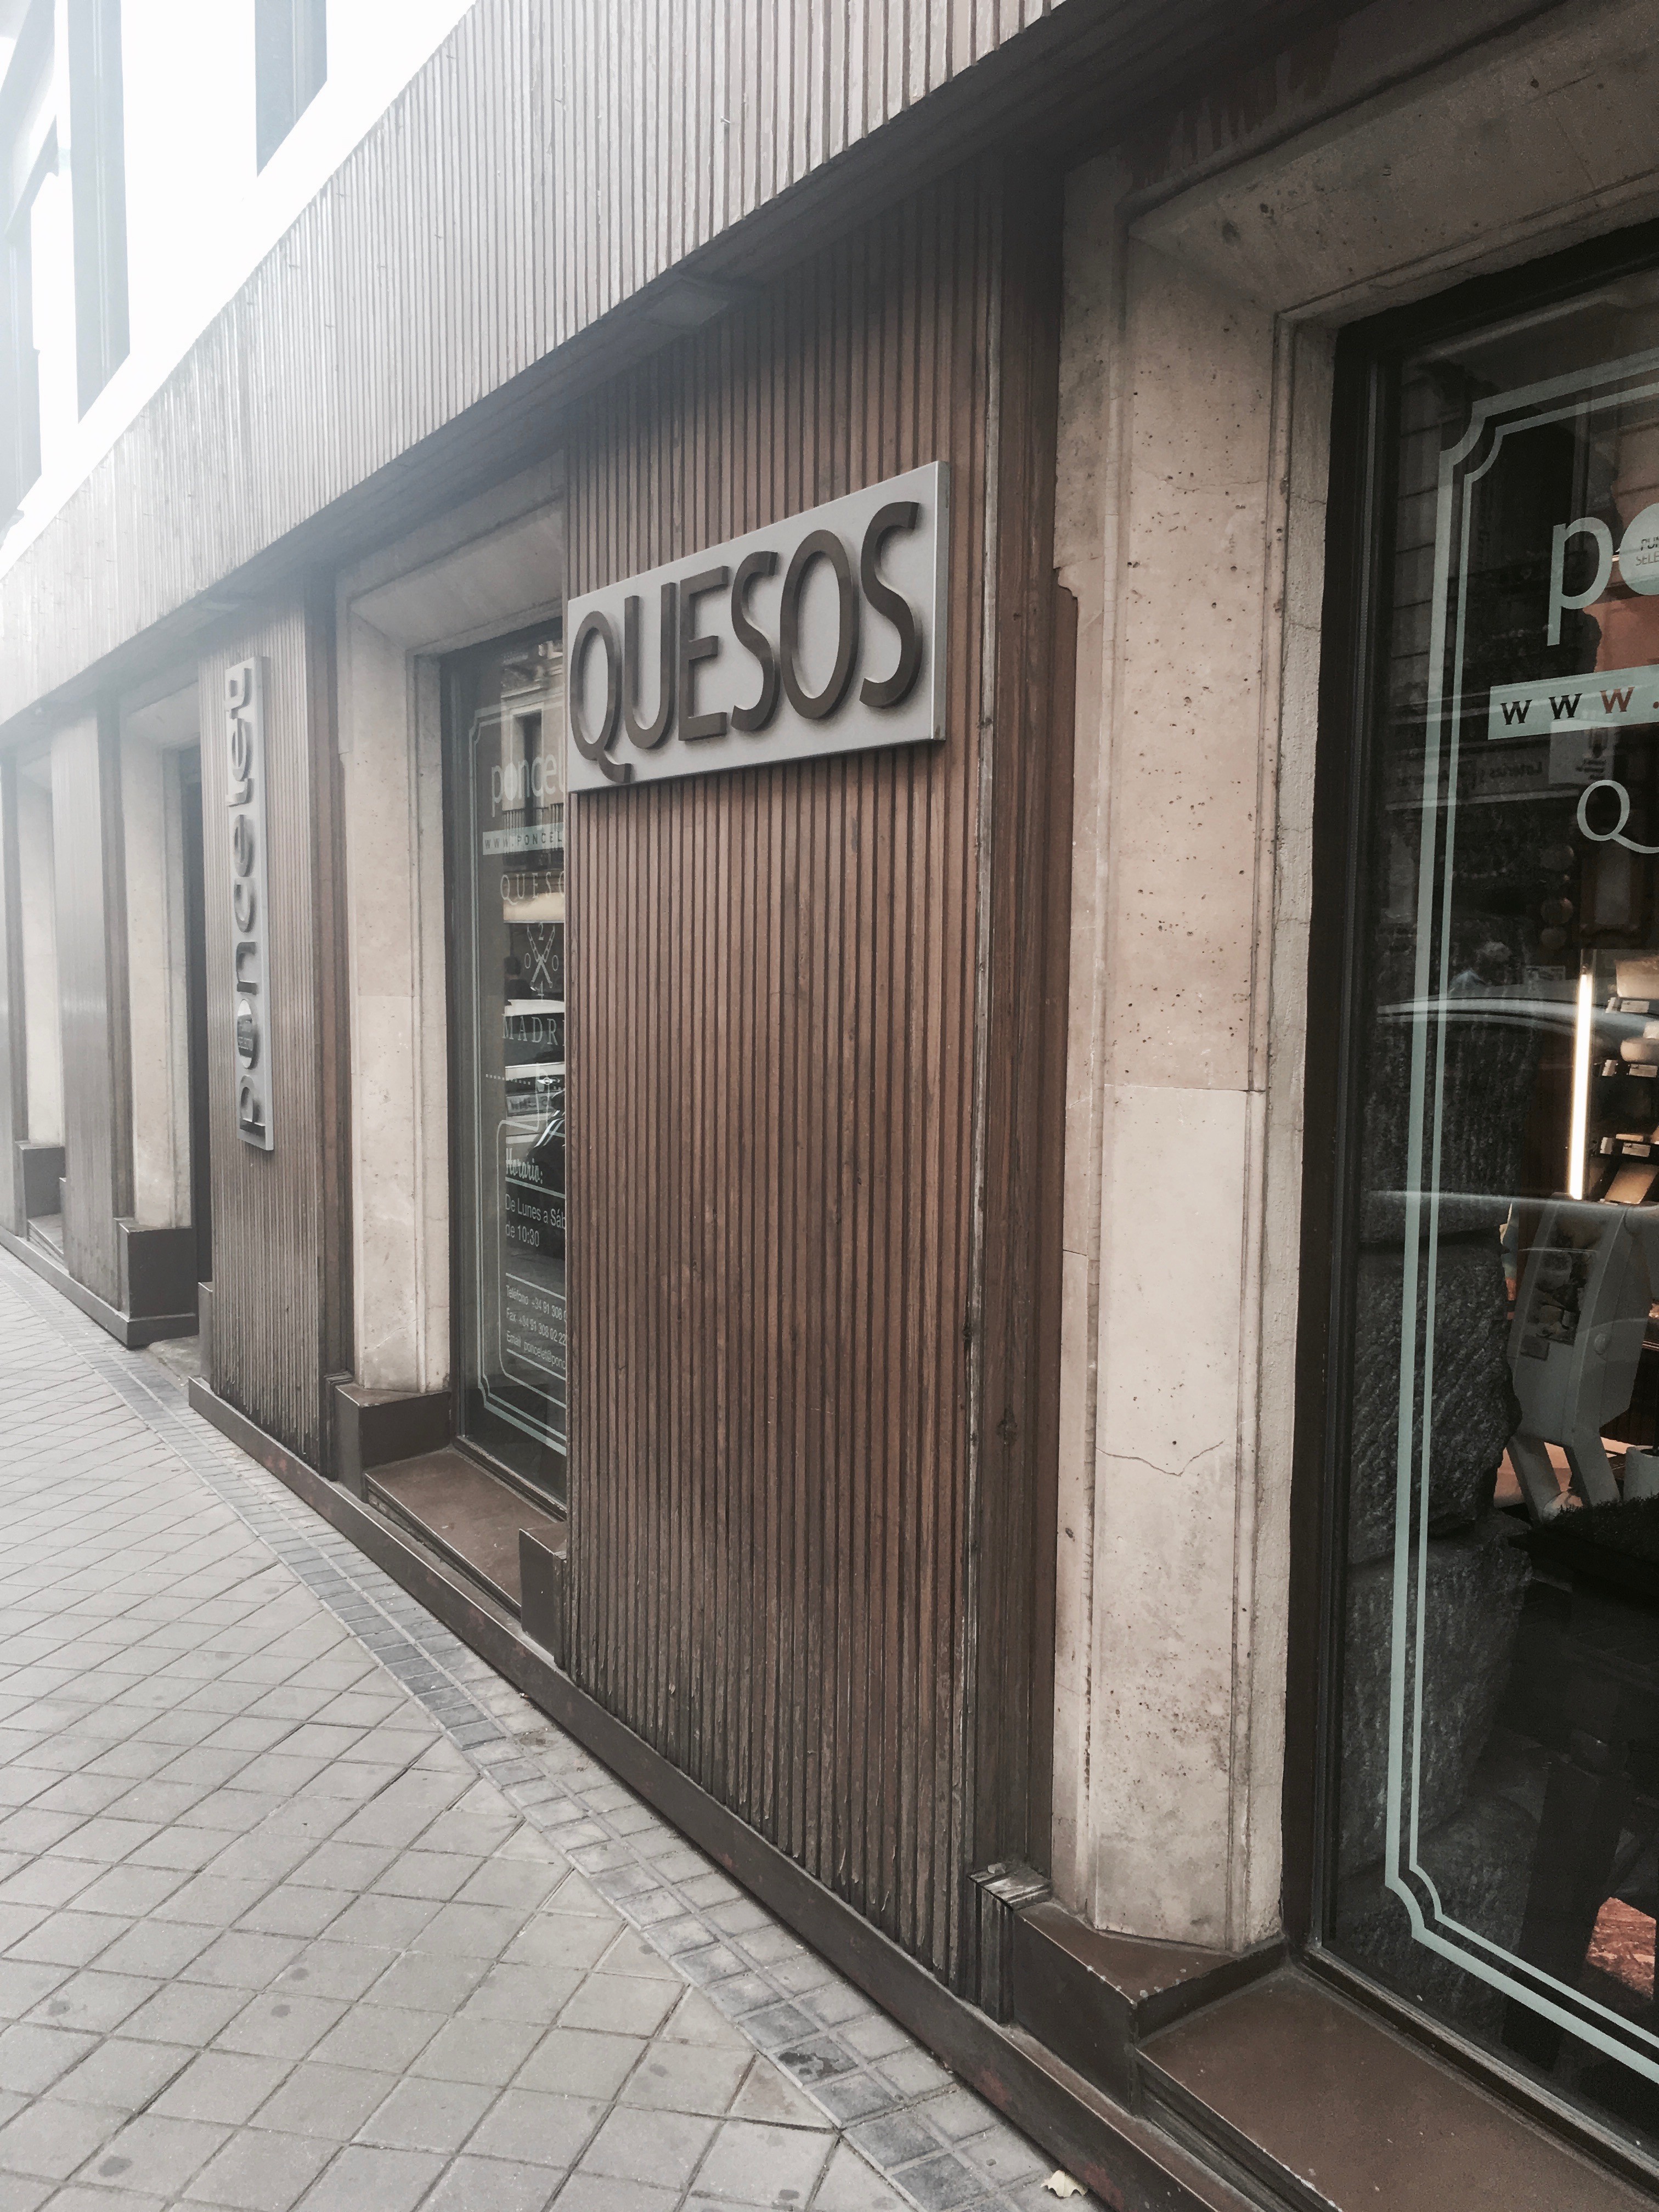 Poncelet quesos, Shop, Madrid, Spain: All year